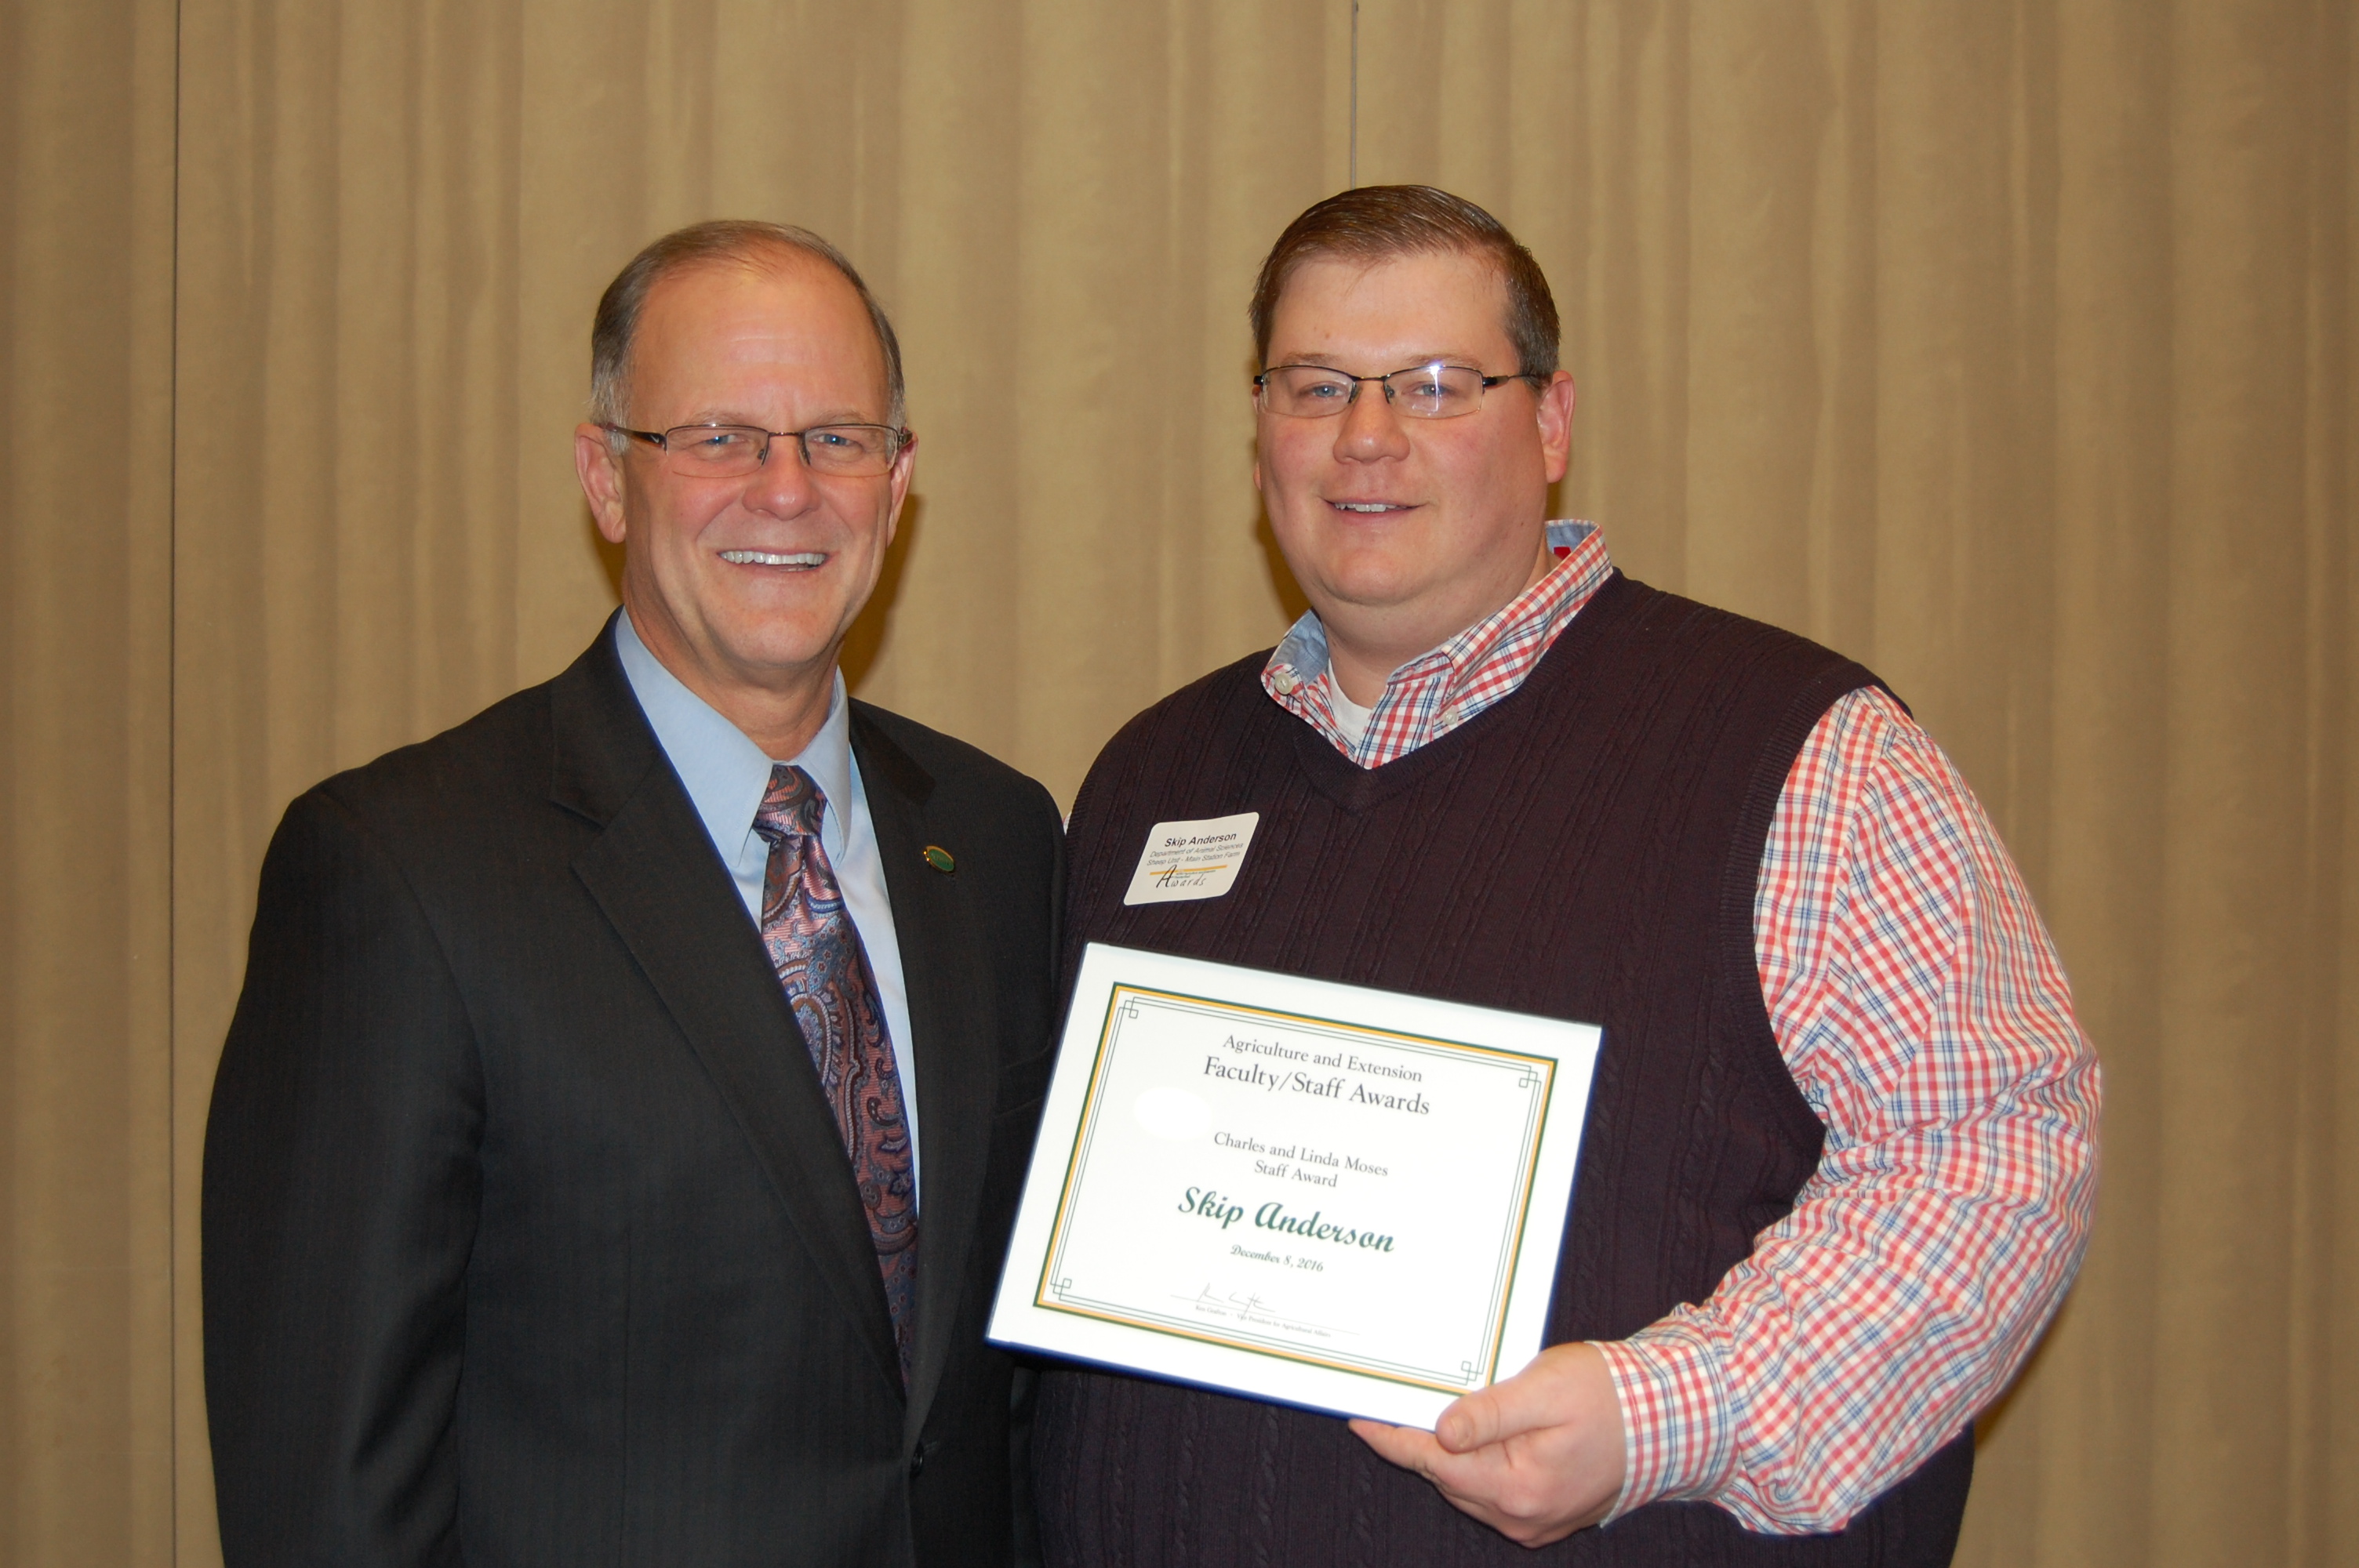 NDSU Sheep Unit manager Skip Anderson, right, receives the Charles and Linda Moses Staff Award during the 25th annual Agriculture and Extension Faculty/Staff Awards program Dec. 8. Also pictured is NDSU President Dean Bresciani. (NDSU photo)